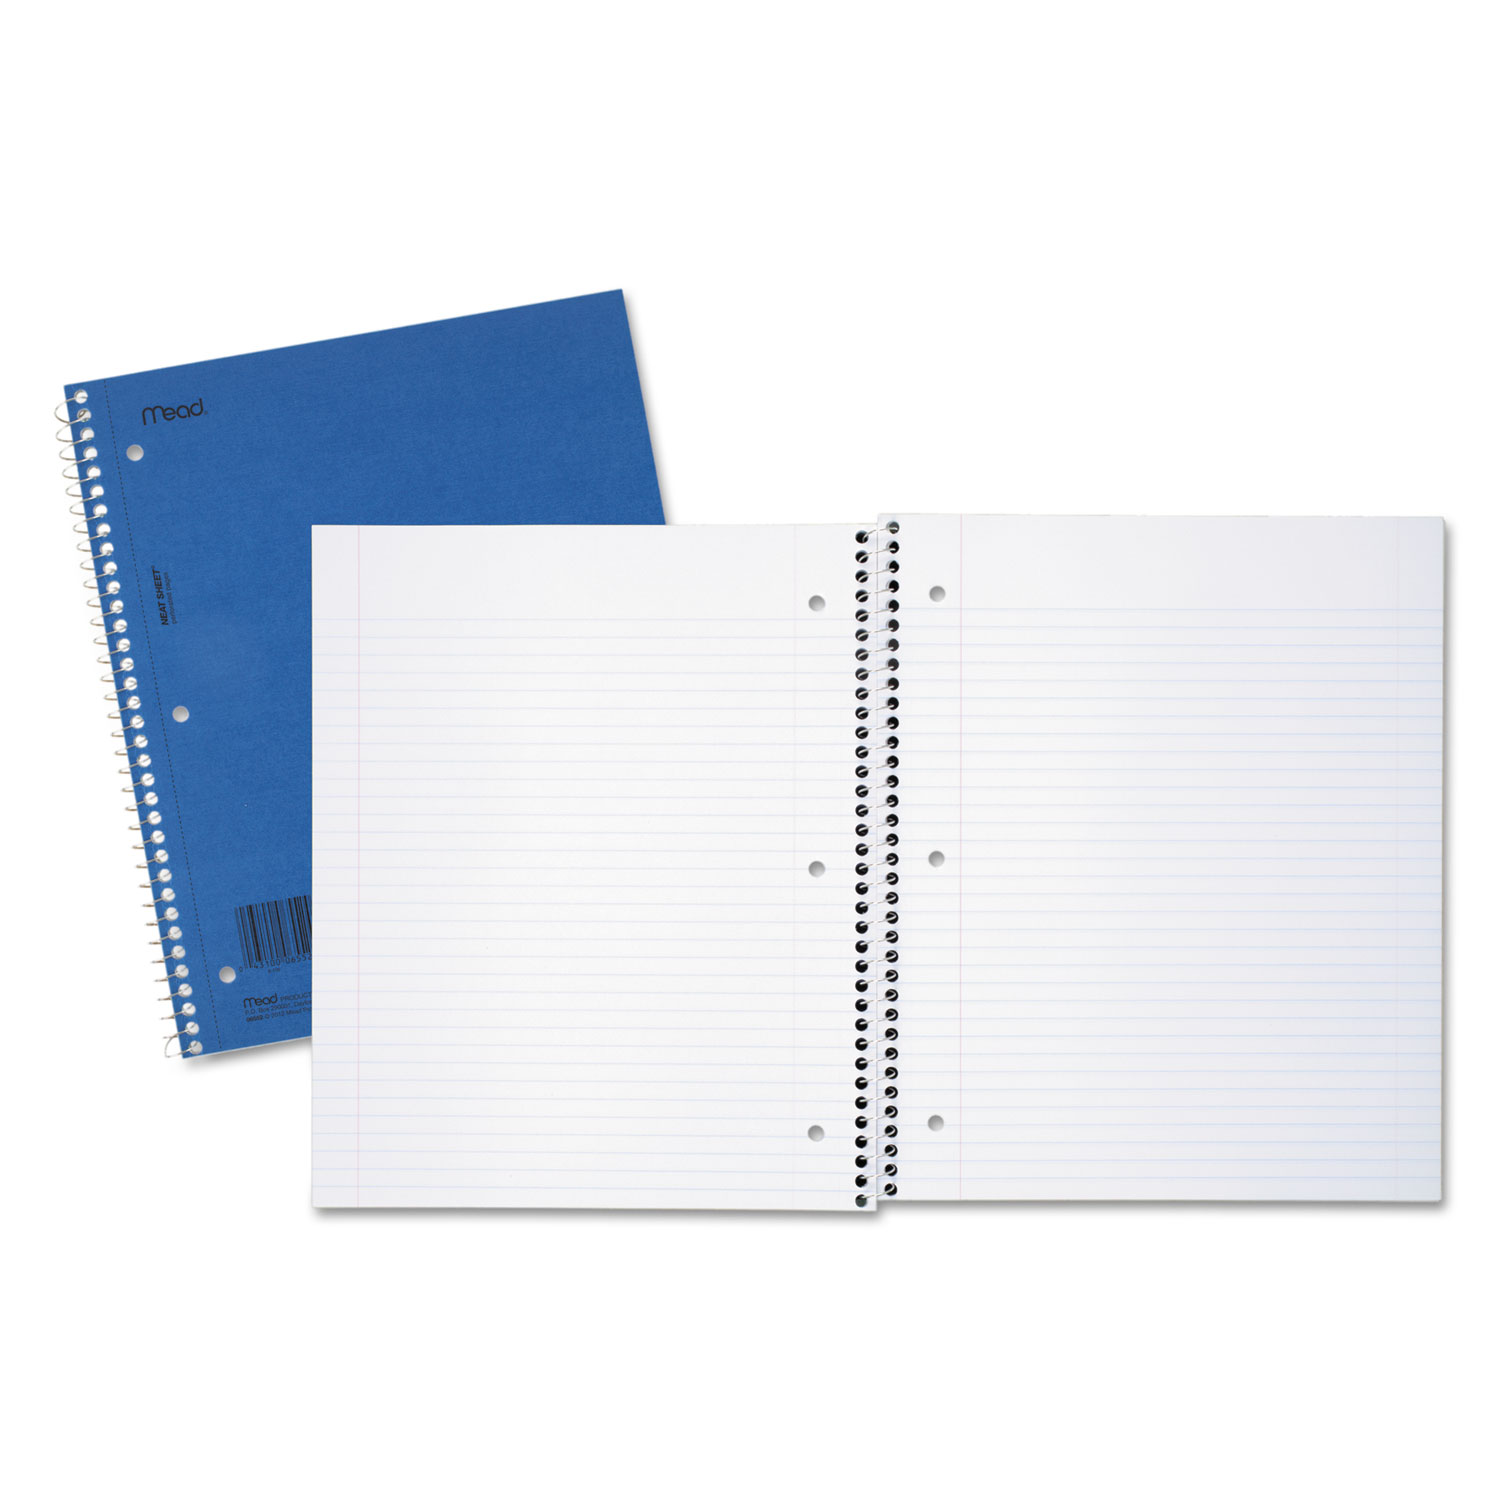 DuraPress Cover Notebook, College Rule, 11 x 8 1/2, White, 50 Sheets